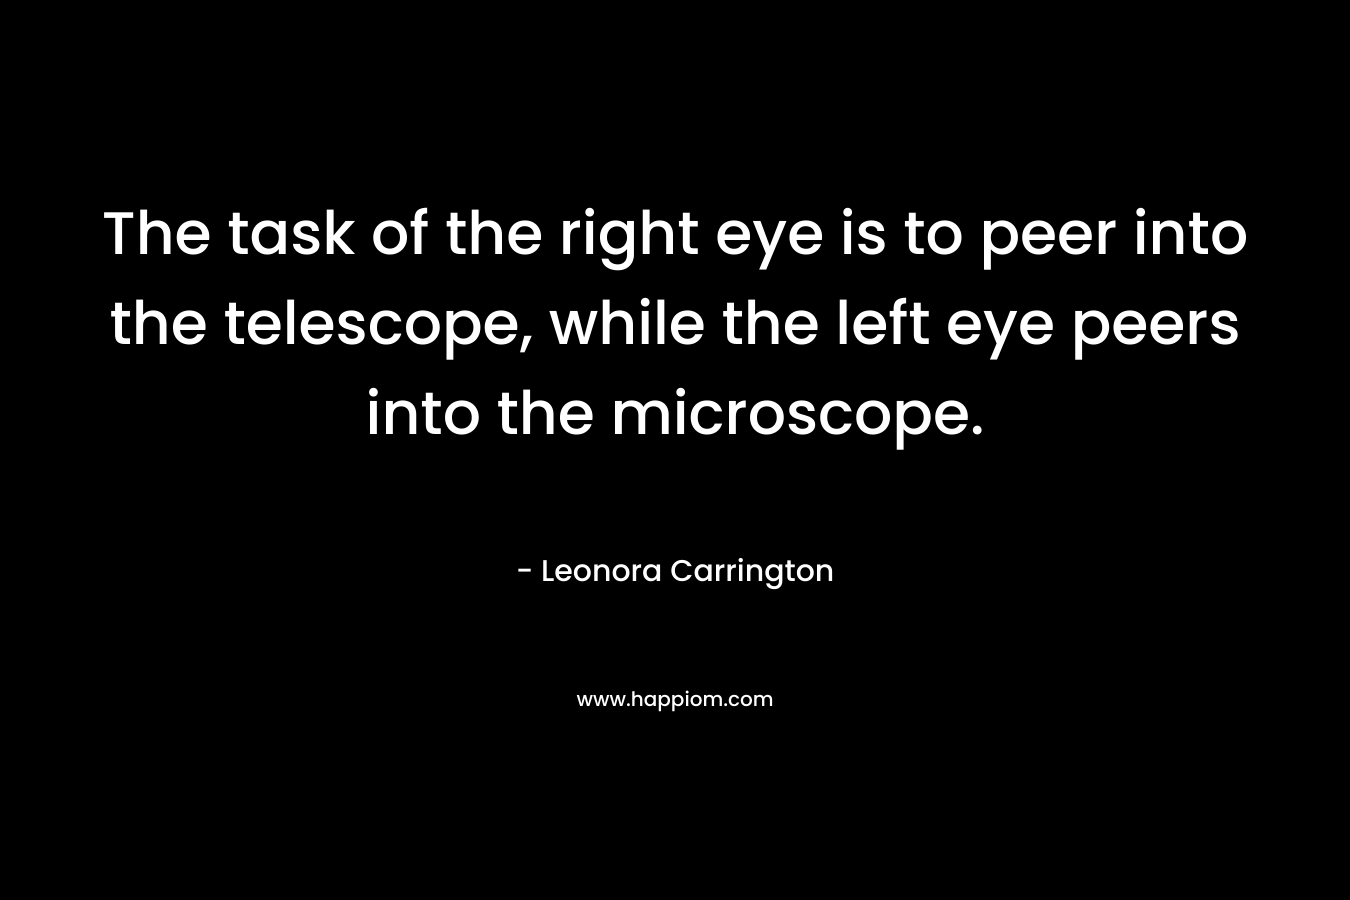 The task of the right eye is to peer into the telescope, while the left eye peers into the microscope.